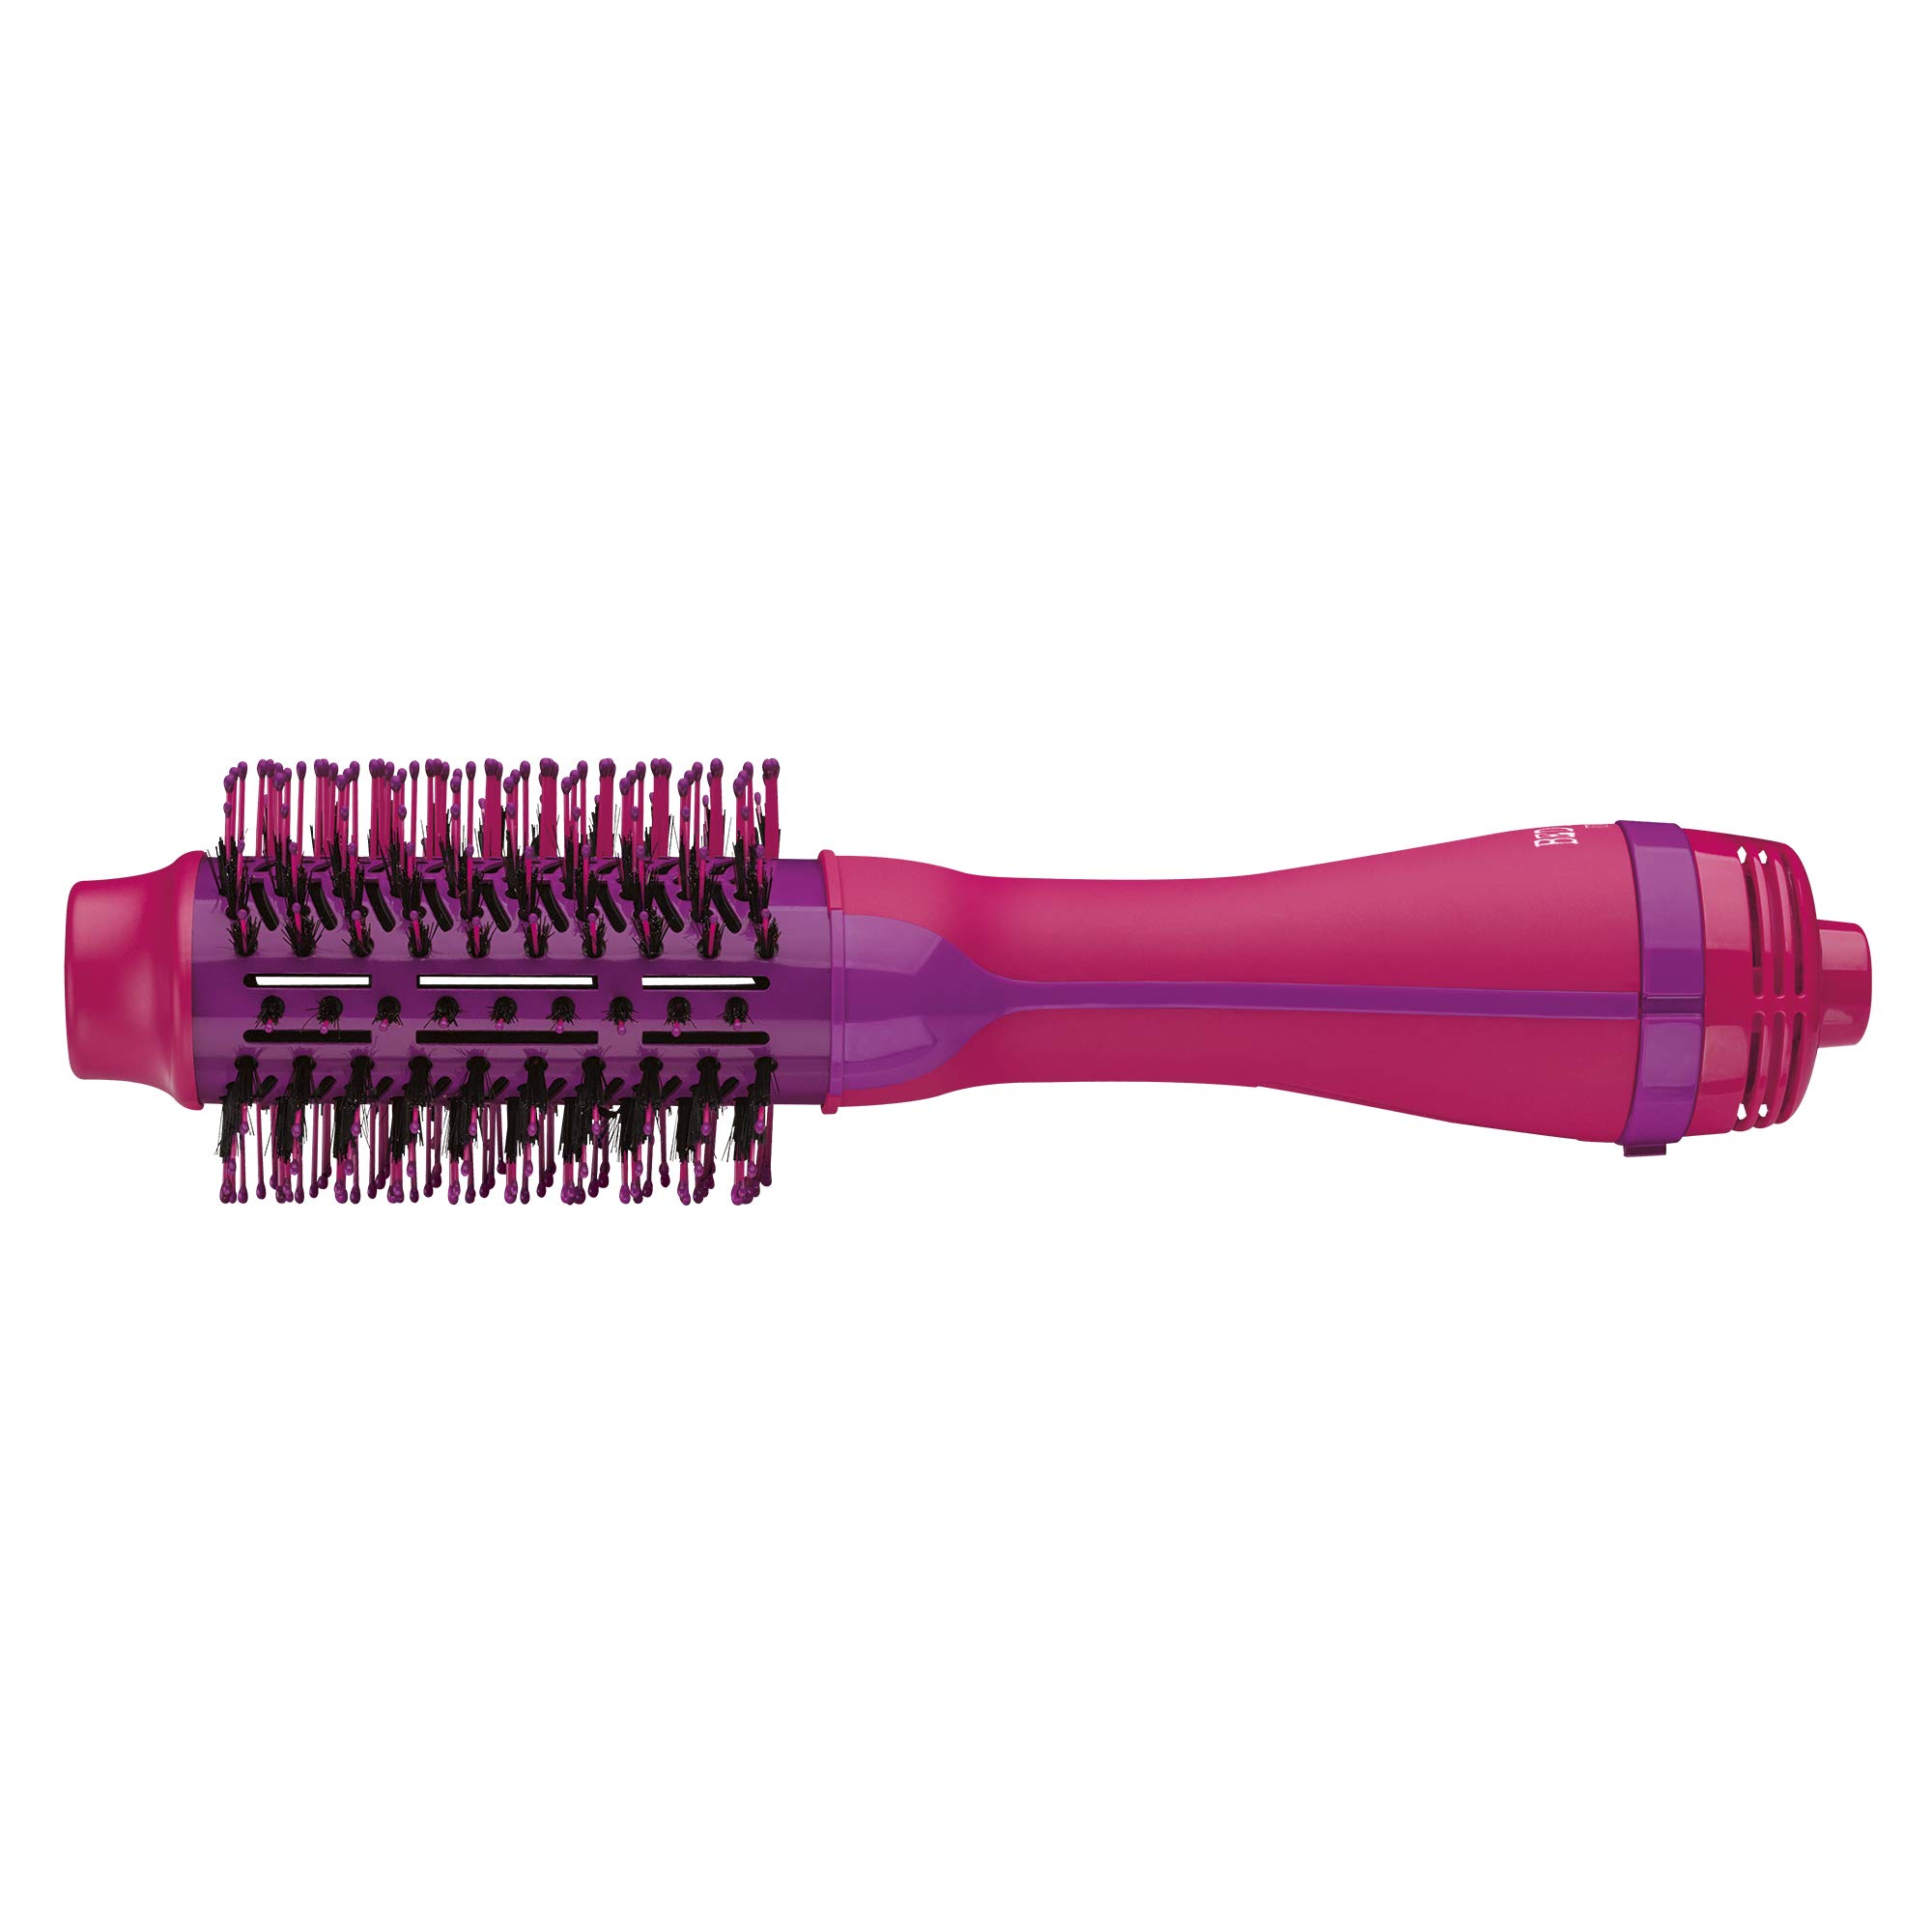 Bed Head One Step Volumizer and Hair Dryer | Dry, Straighten, Texture, Style in One Step (Pink)